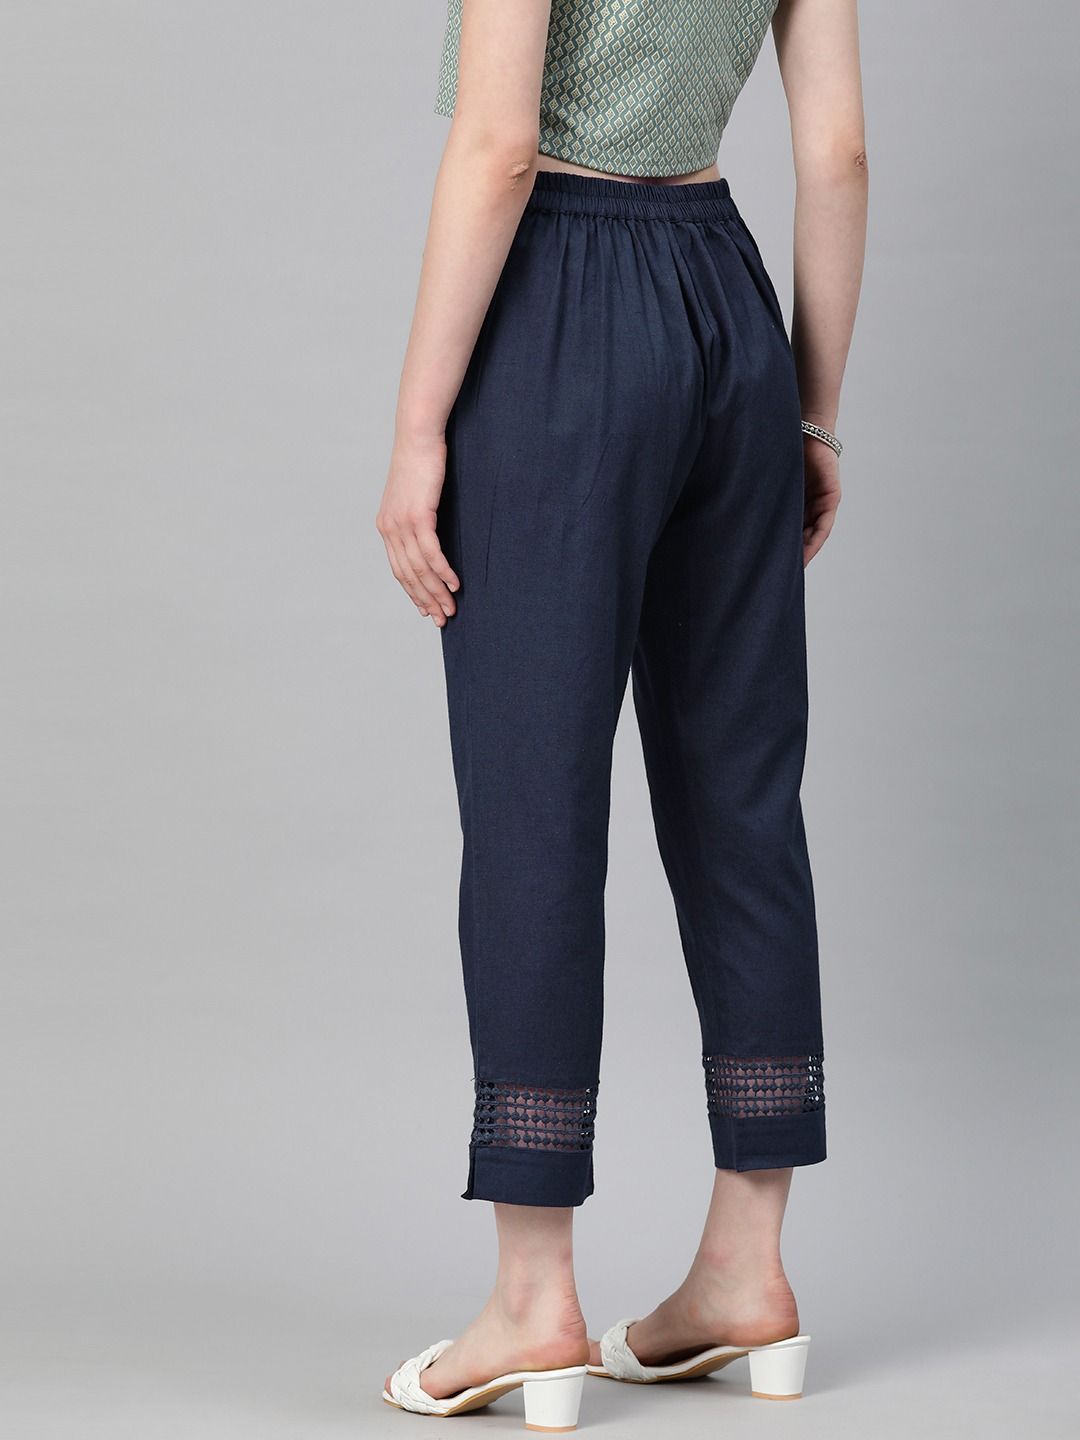 Straight Style Cotton Fabric Navy Blue Color Trouser